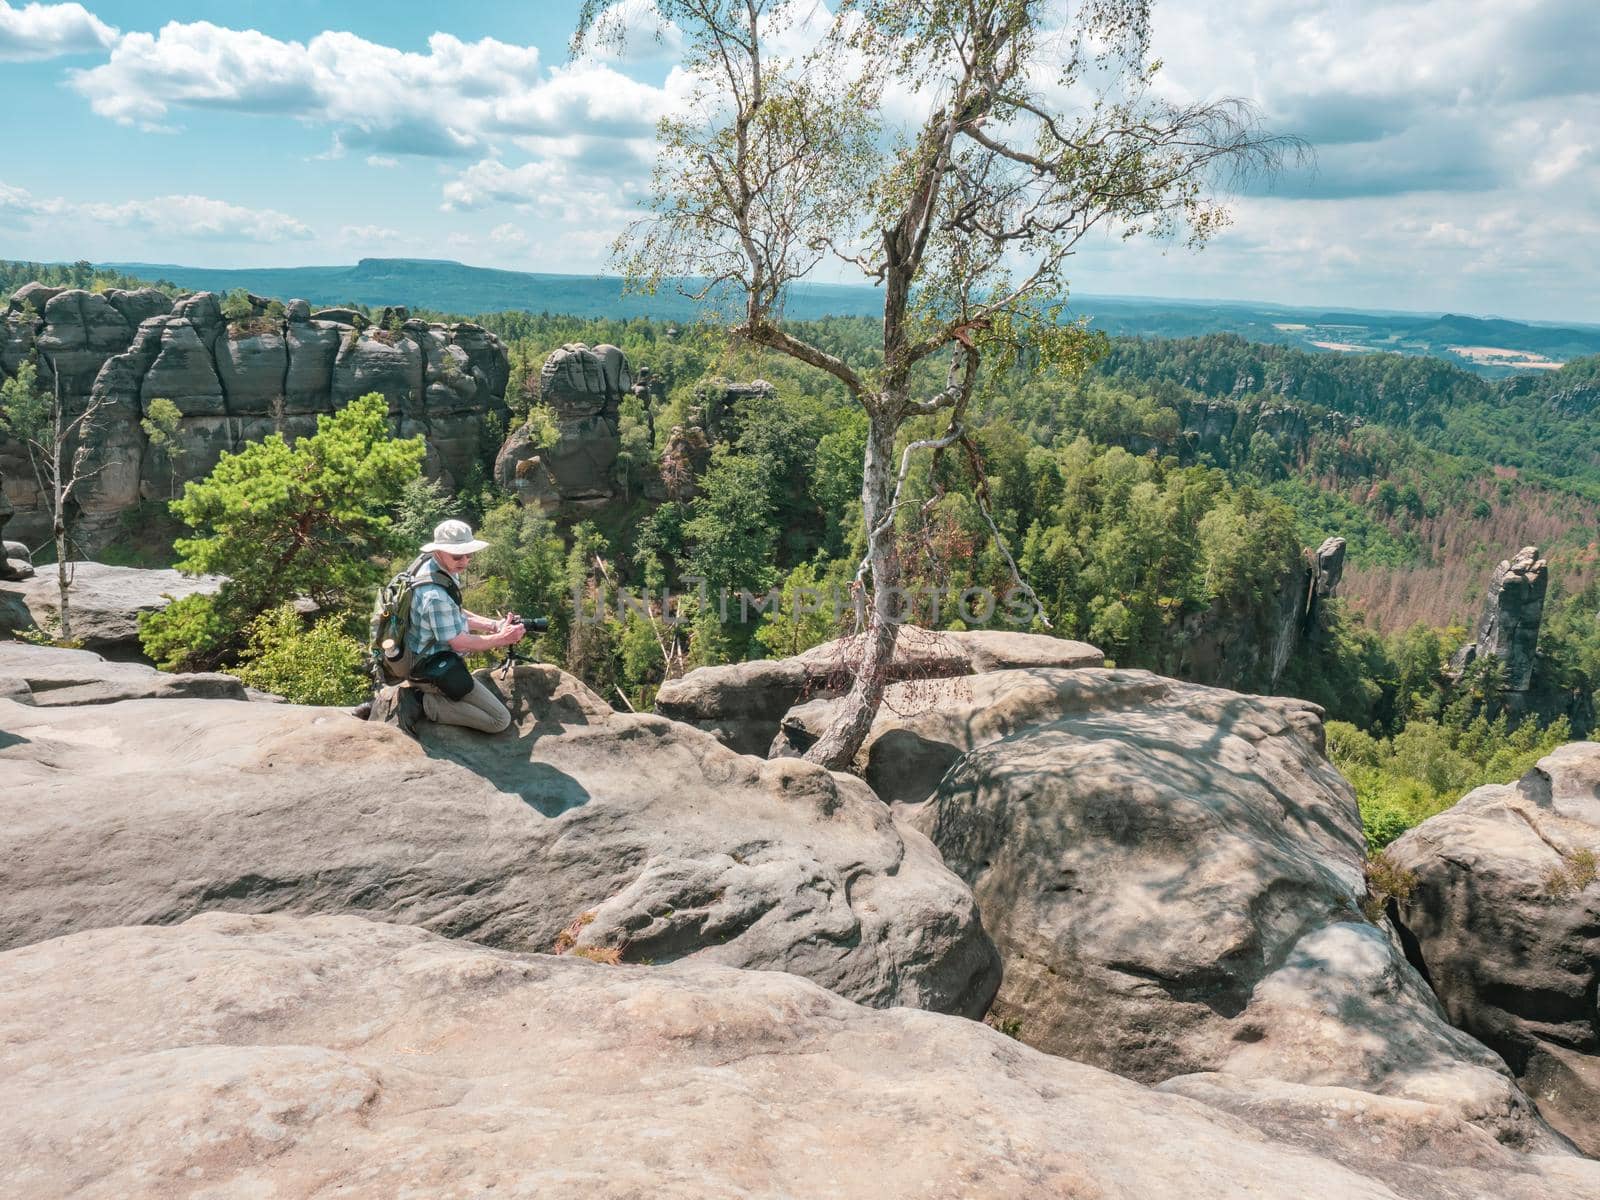 Schmilka - Germany, July 06, 2022: Tourist with camera is taking photos behind the Schrammsteine rock massif, Saxon Switzerland, Germany. View from the Carolafelsen viewpoint